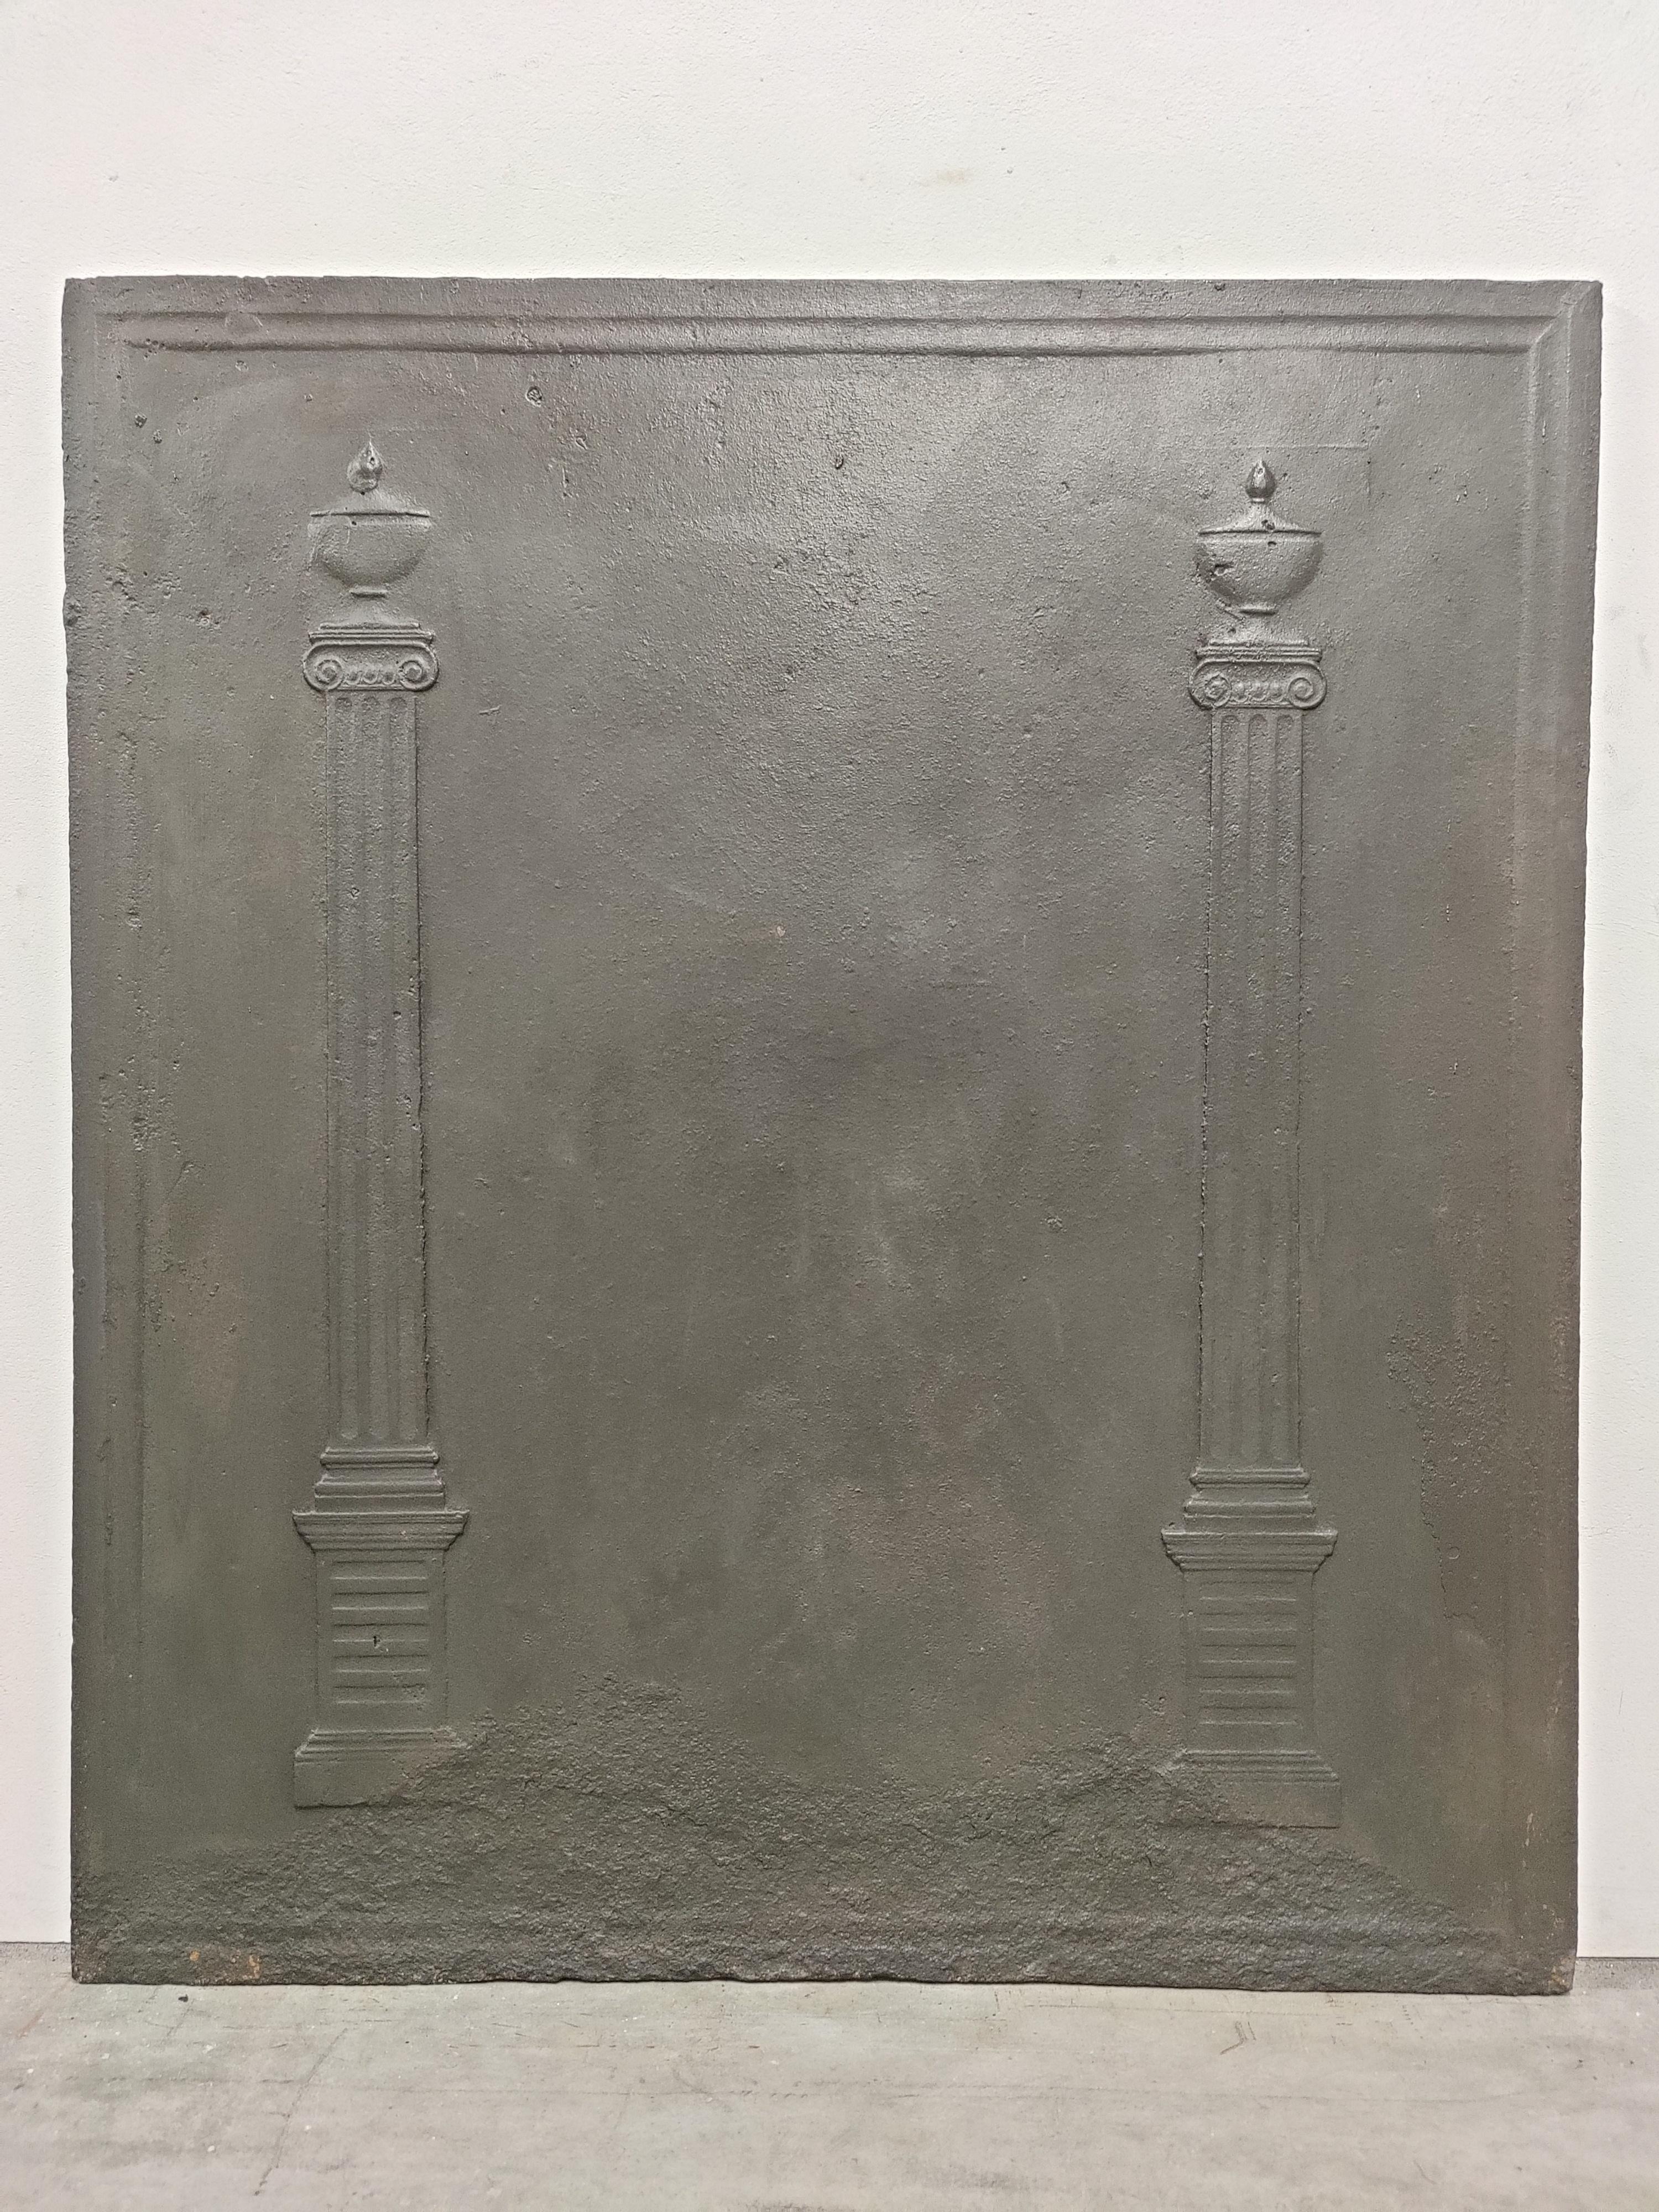 Antique fireback / backsplash, two tall pillars.

Nice massive cast iron antique fireback displaying two massive tall pillars.
Great condition, can be used in a real gas or log fire.
Very decorative piece.
146 lbs / 66 kg.

 
 